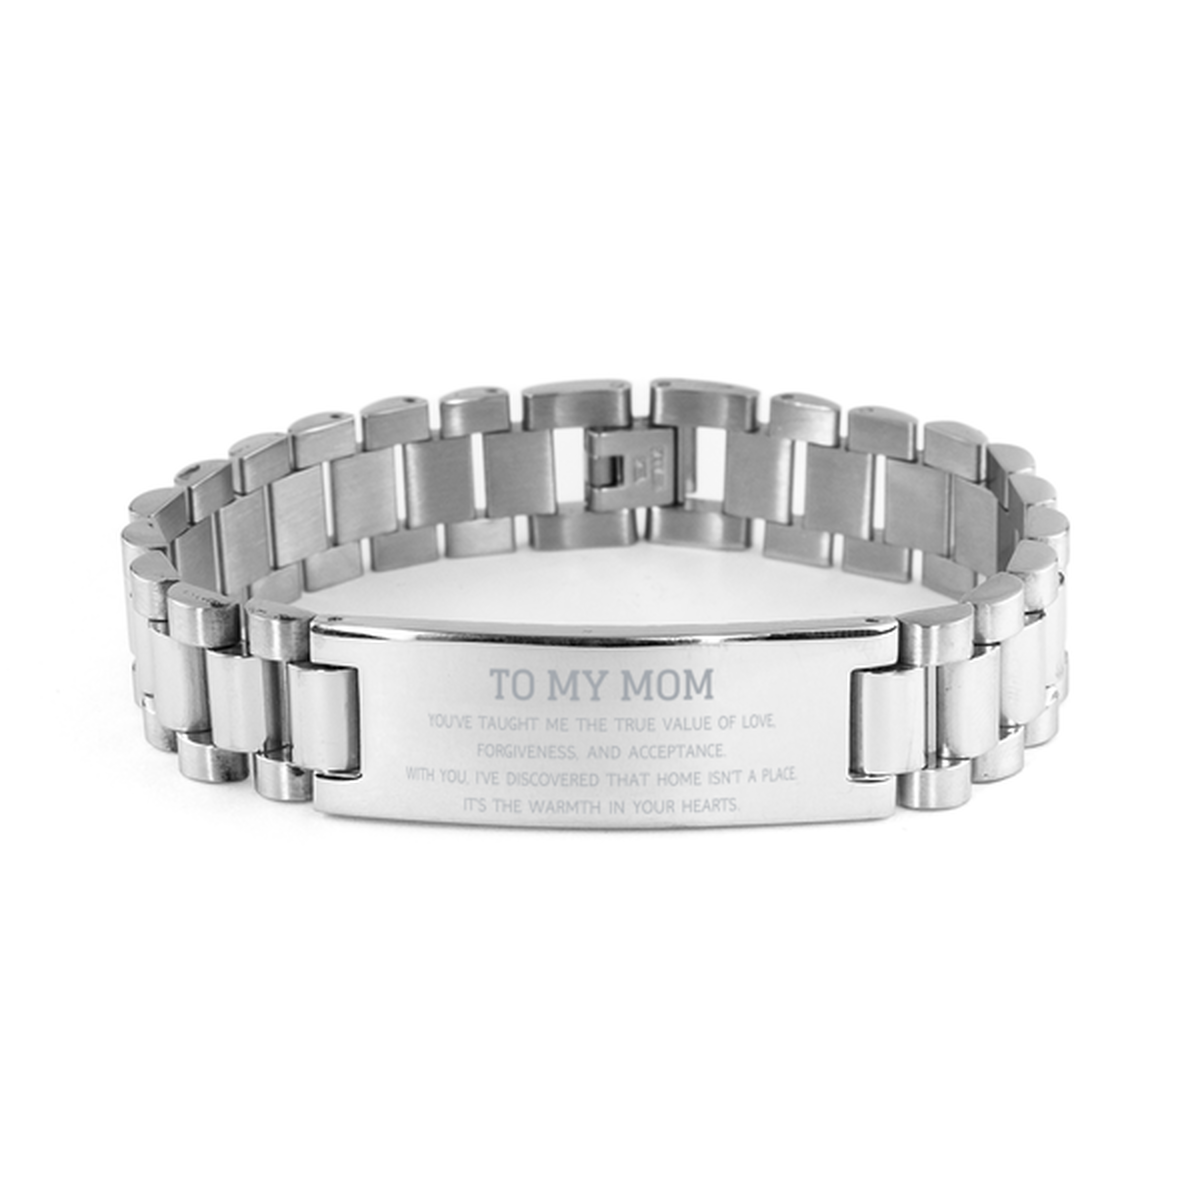 To My Mom Gifts, You've taught me the true value of love, Thank You Gifts For Mom, Birthday Ladder Stainless Steel Bracelet For Mom